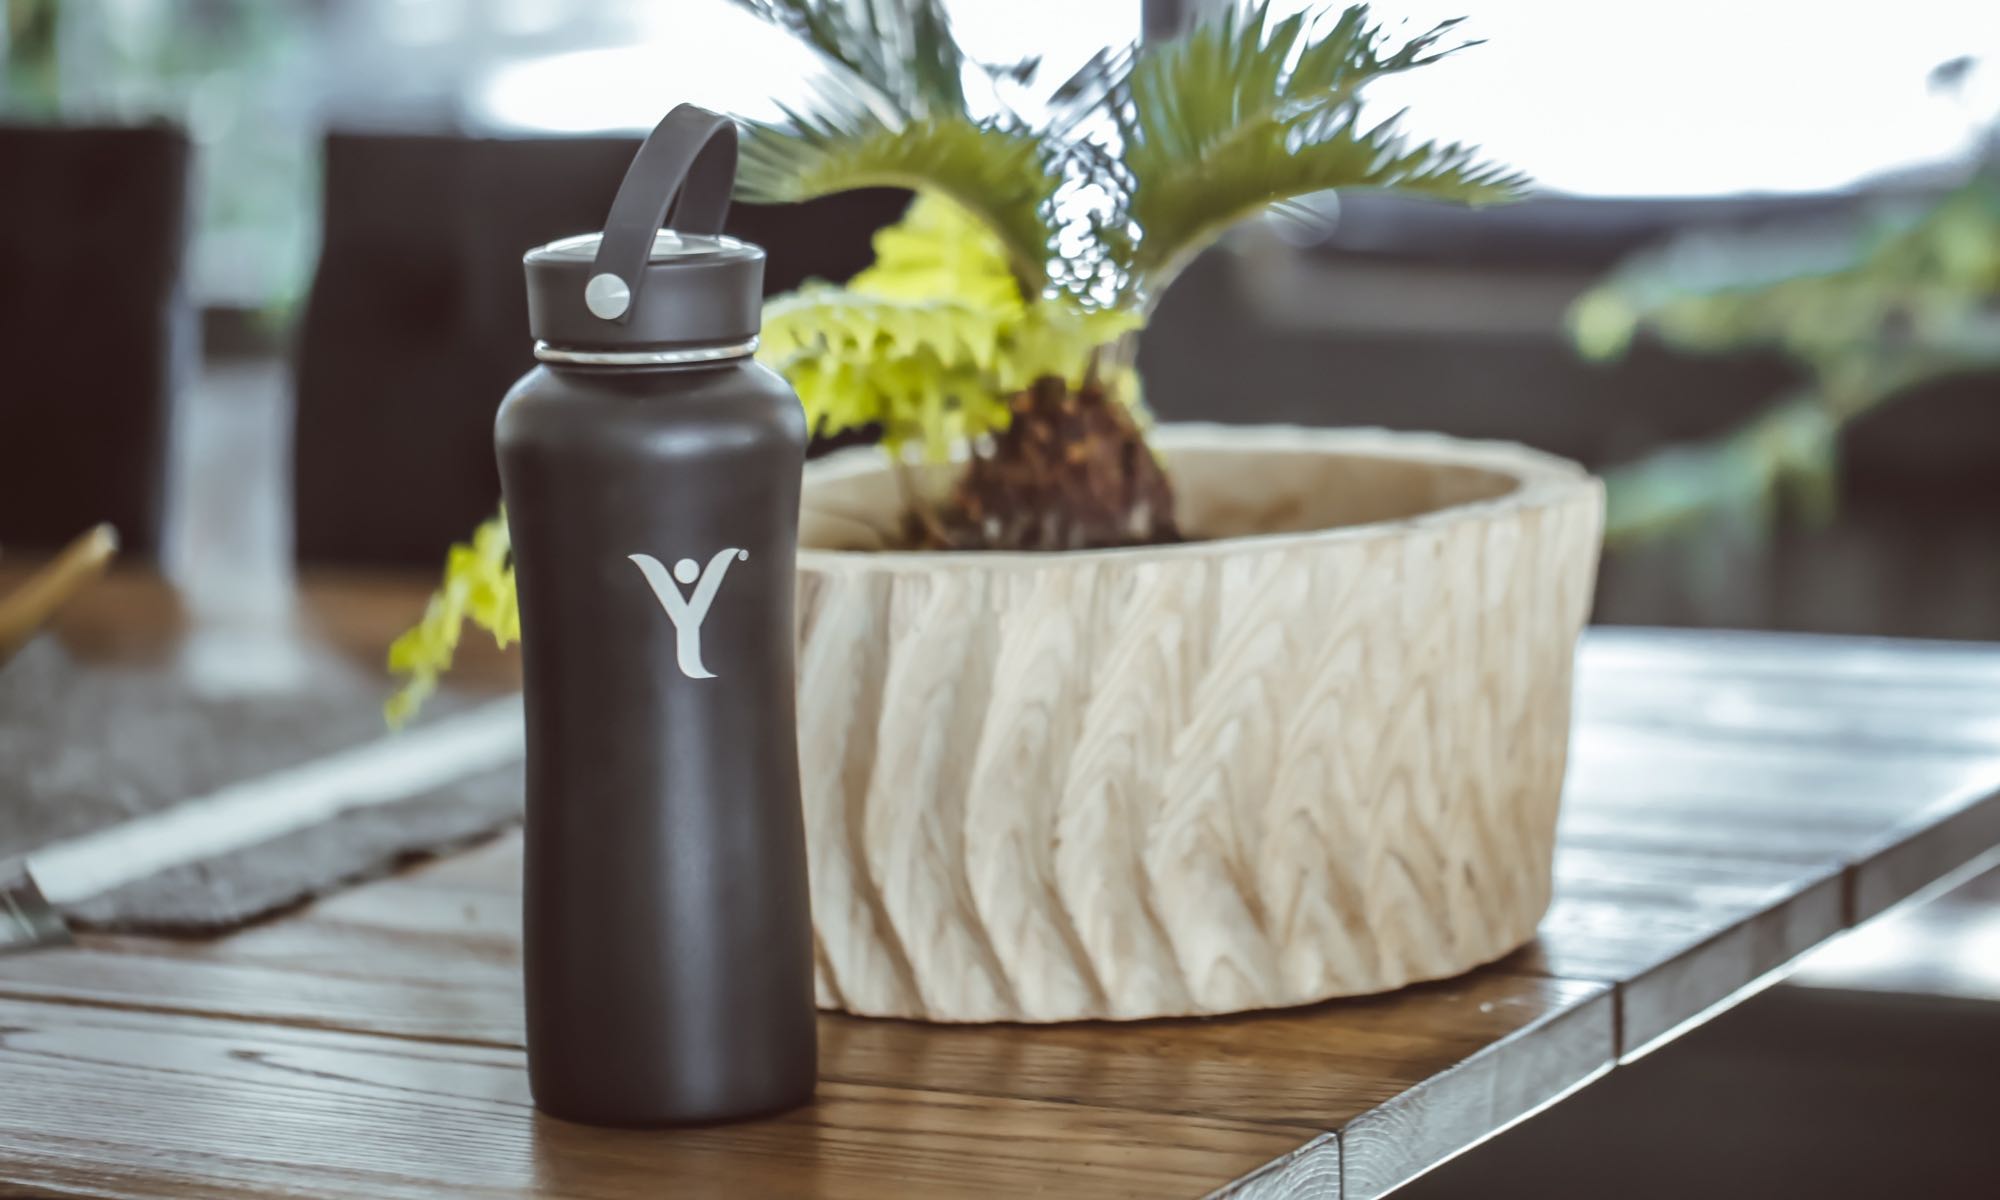 Vacuum insulated bottle how it works?